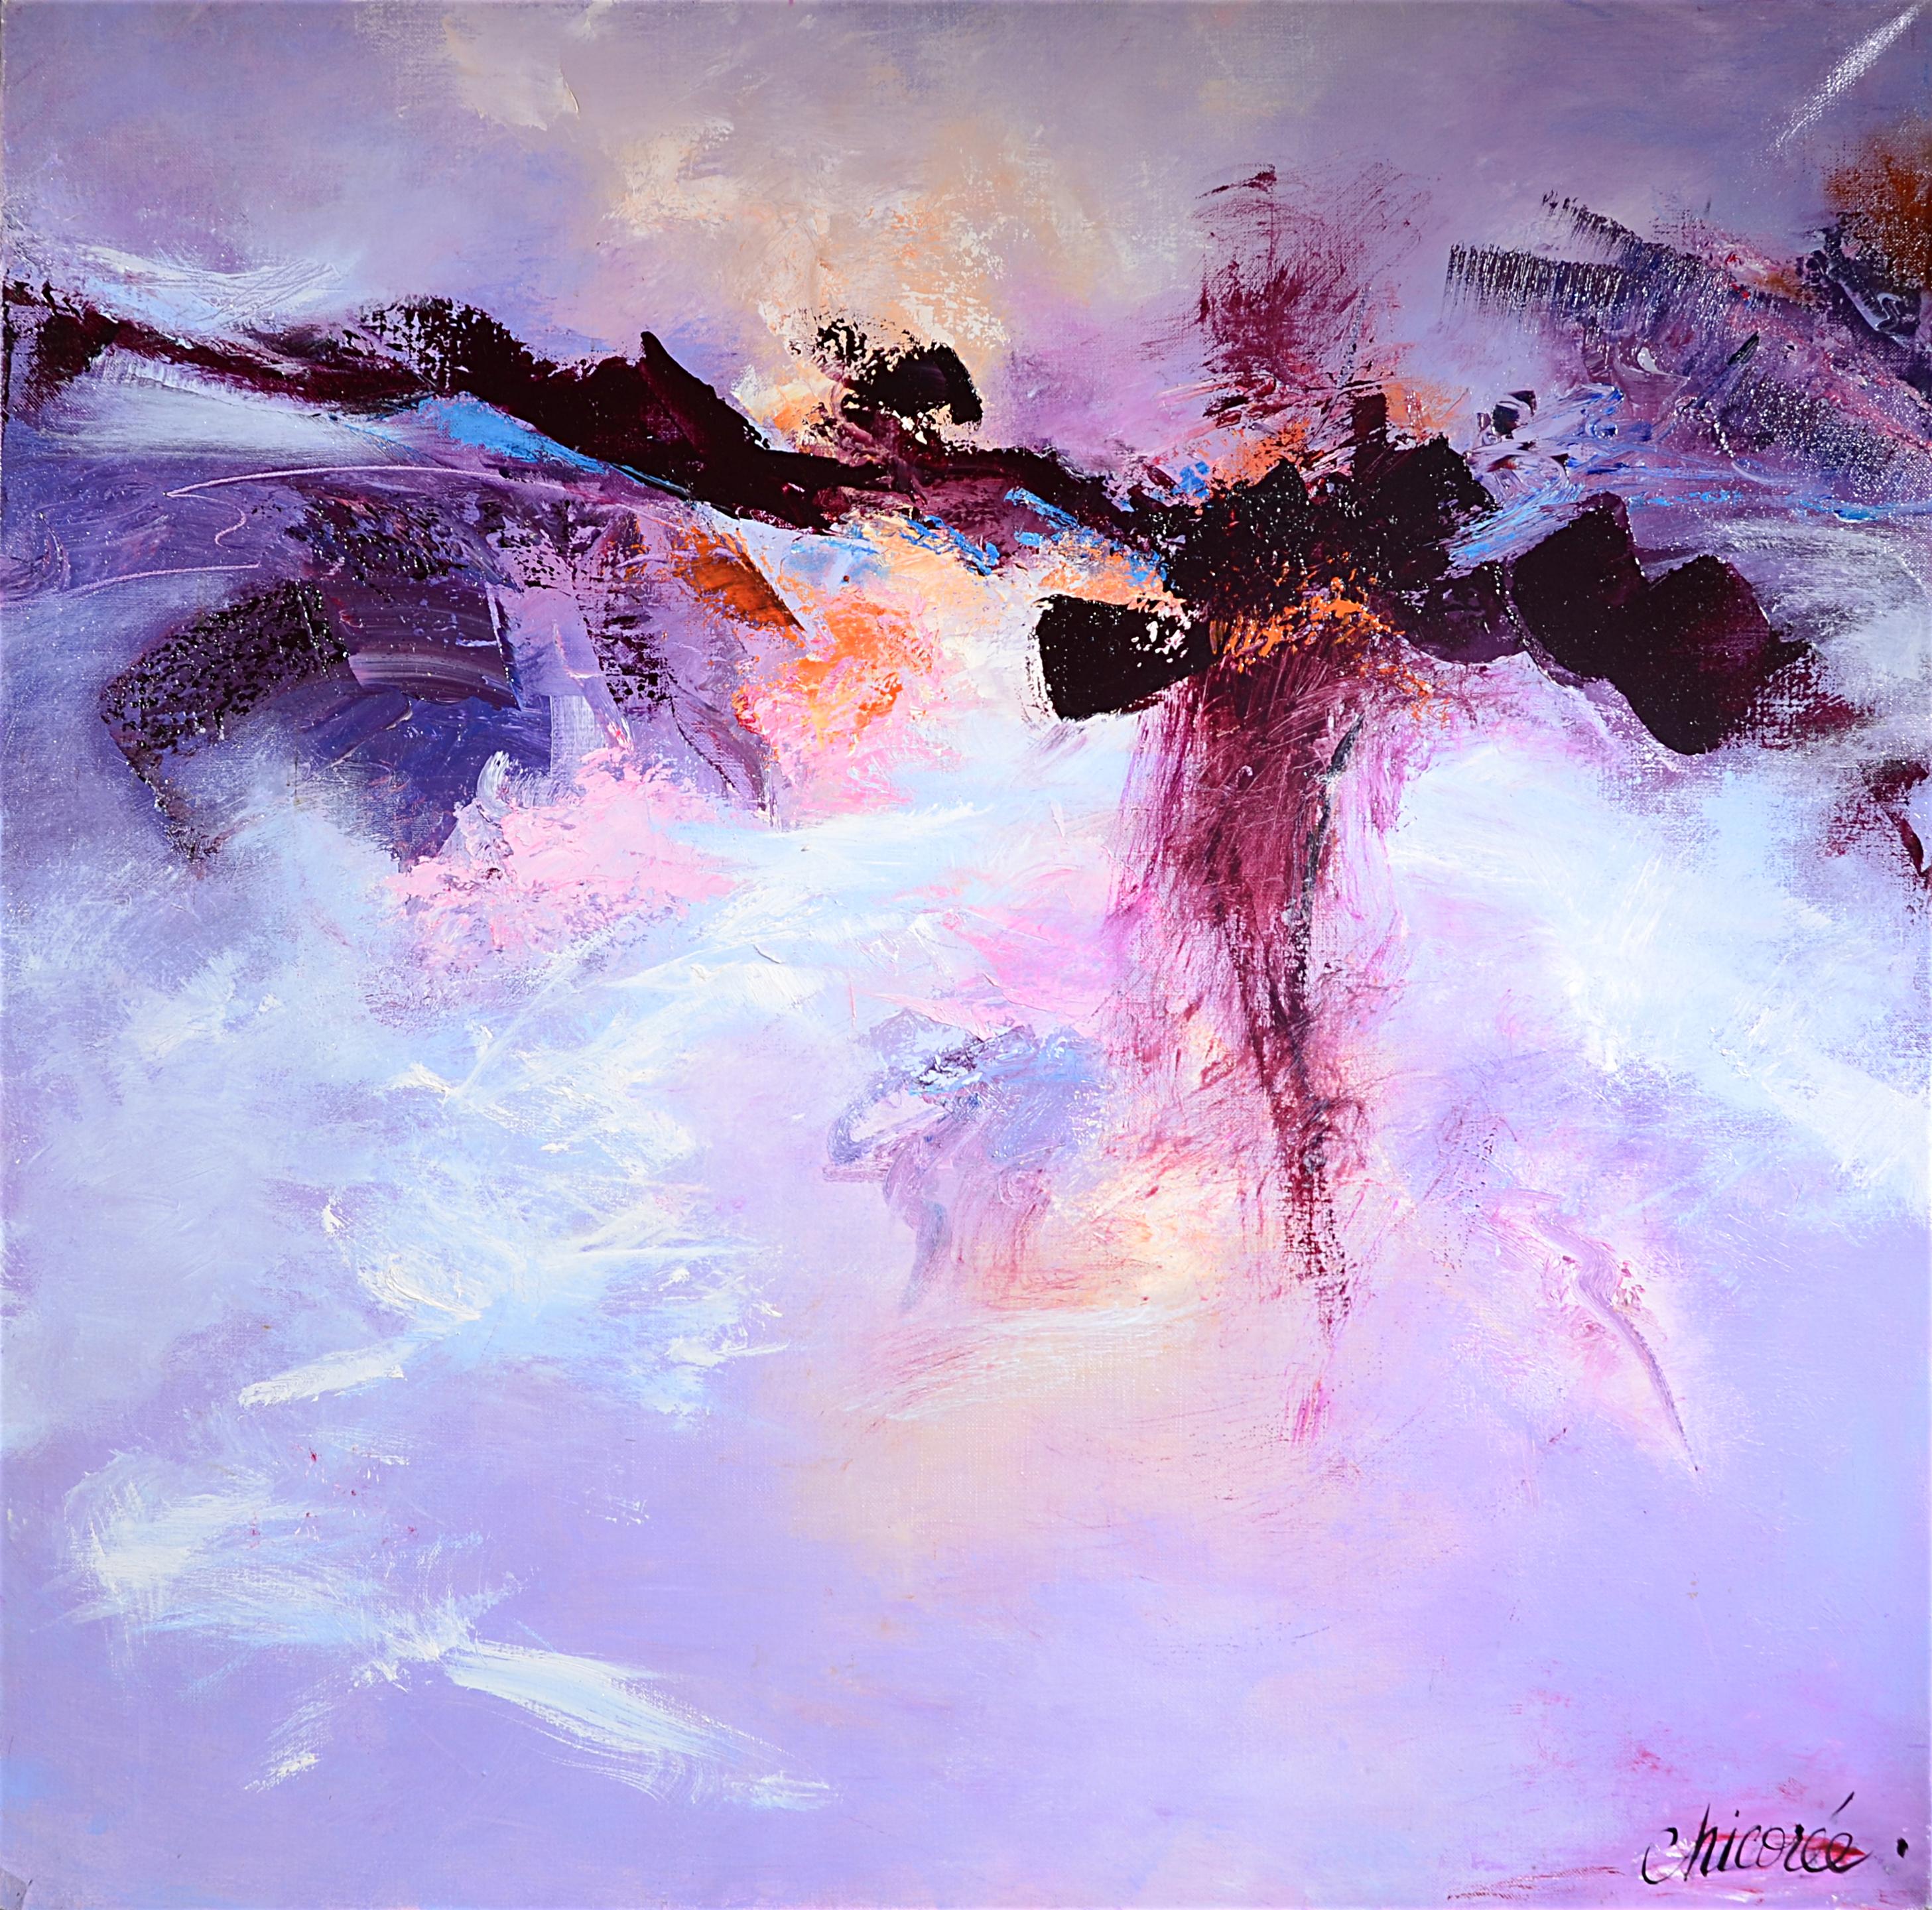 Chicorée Abstract Painting - The Woman ("La femme"), Large Purple Abstract Squared Oil Painting